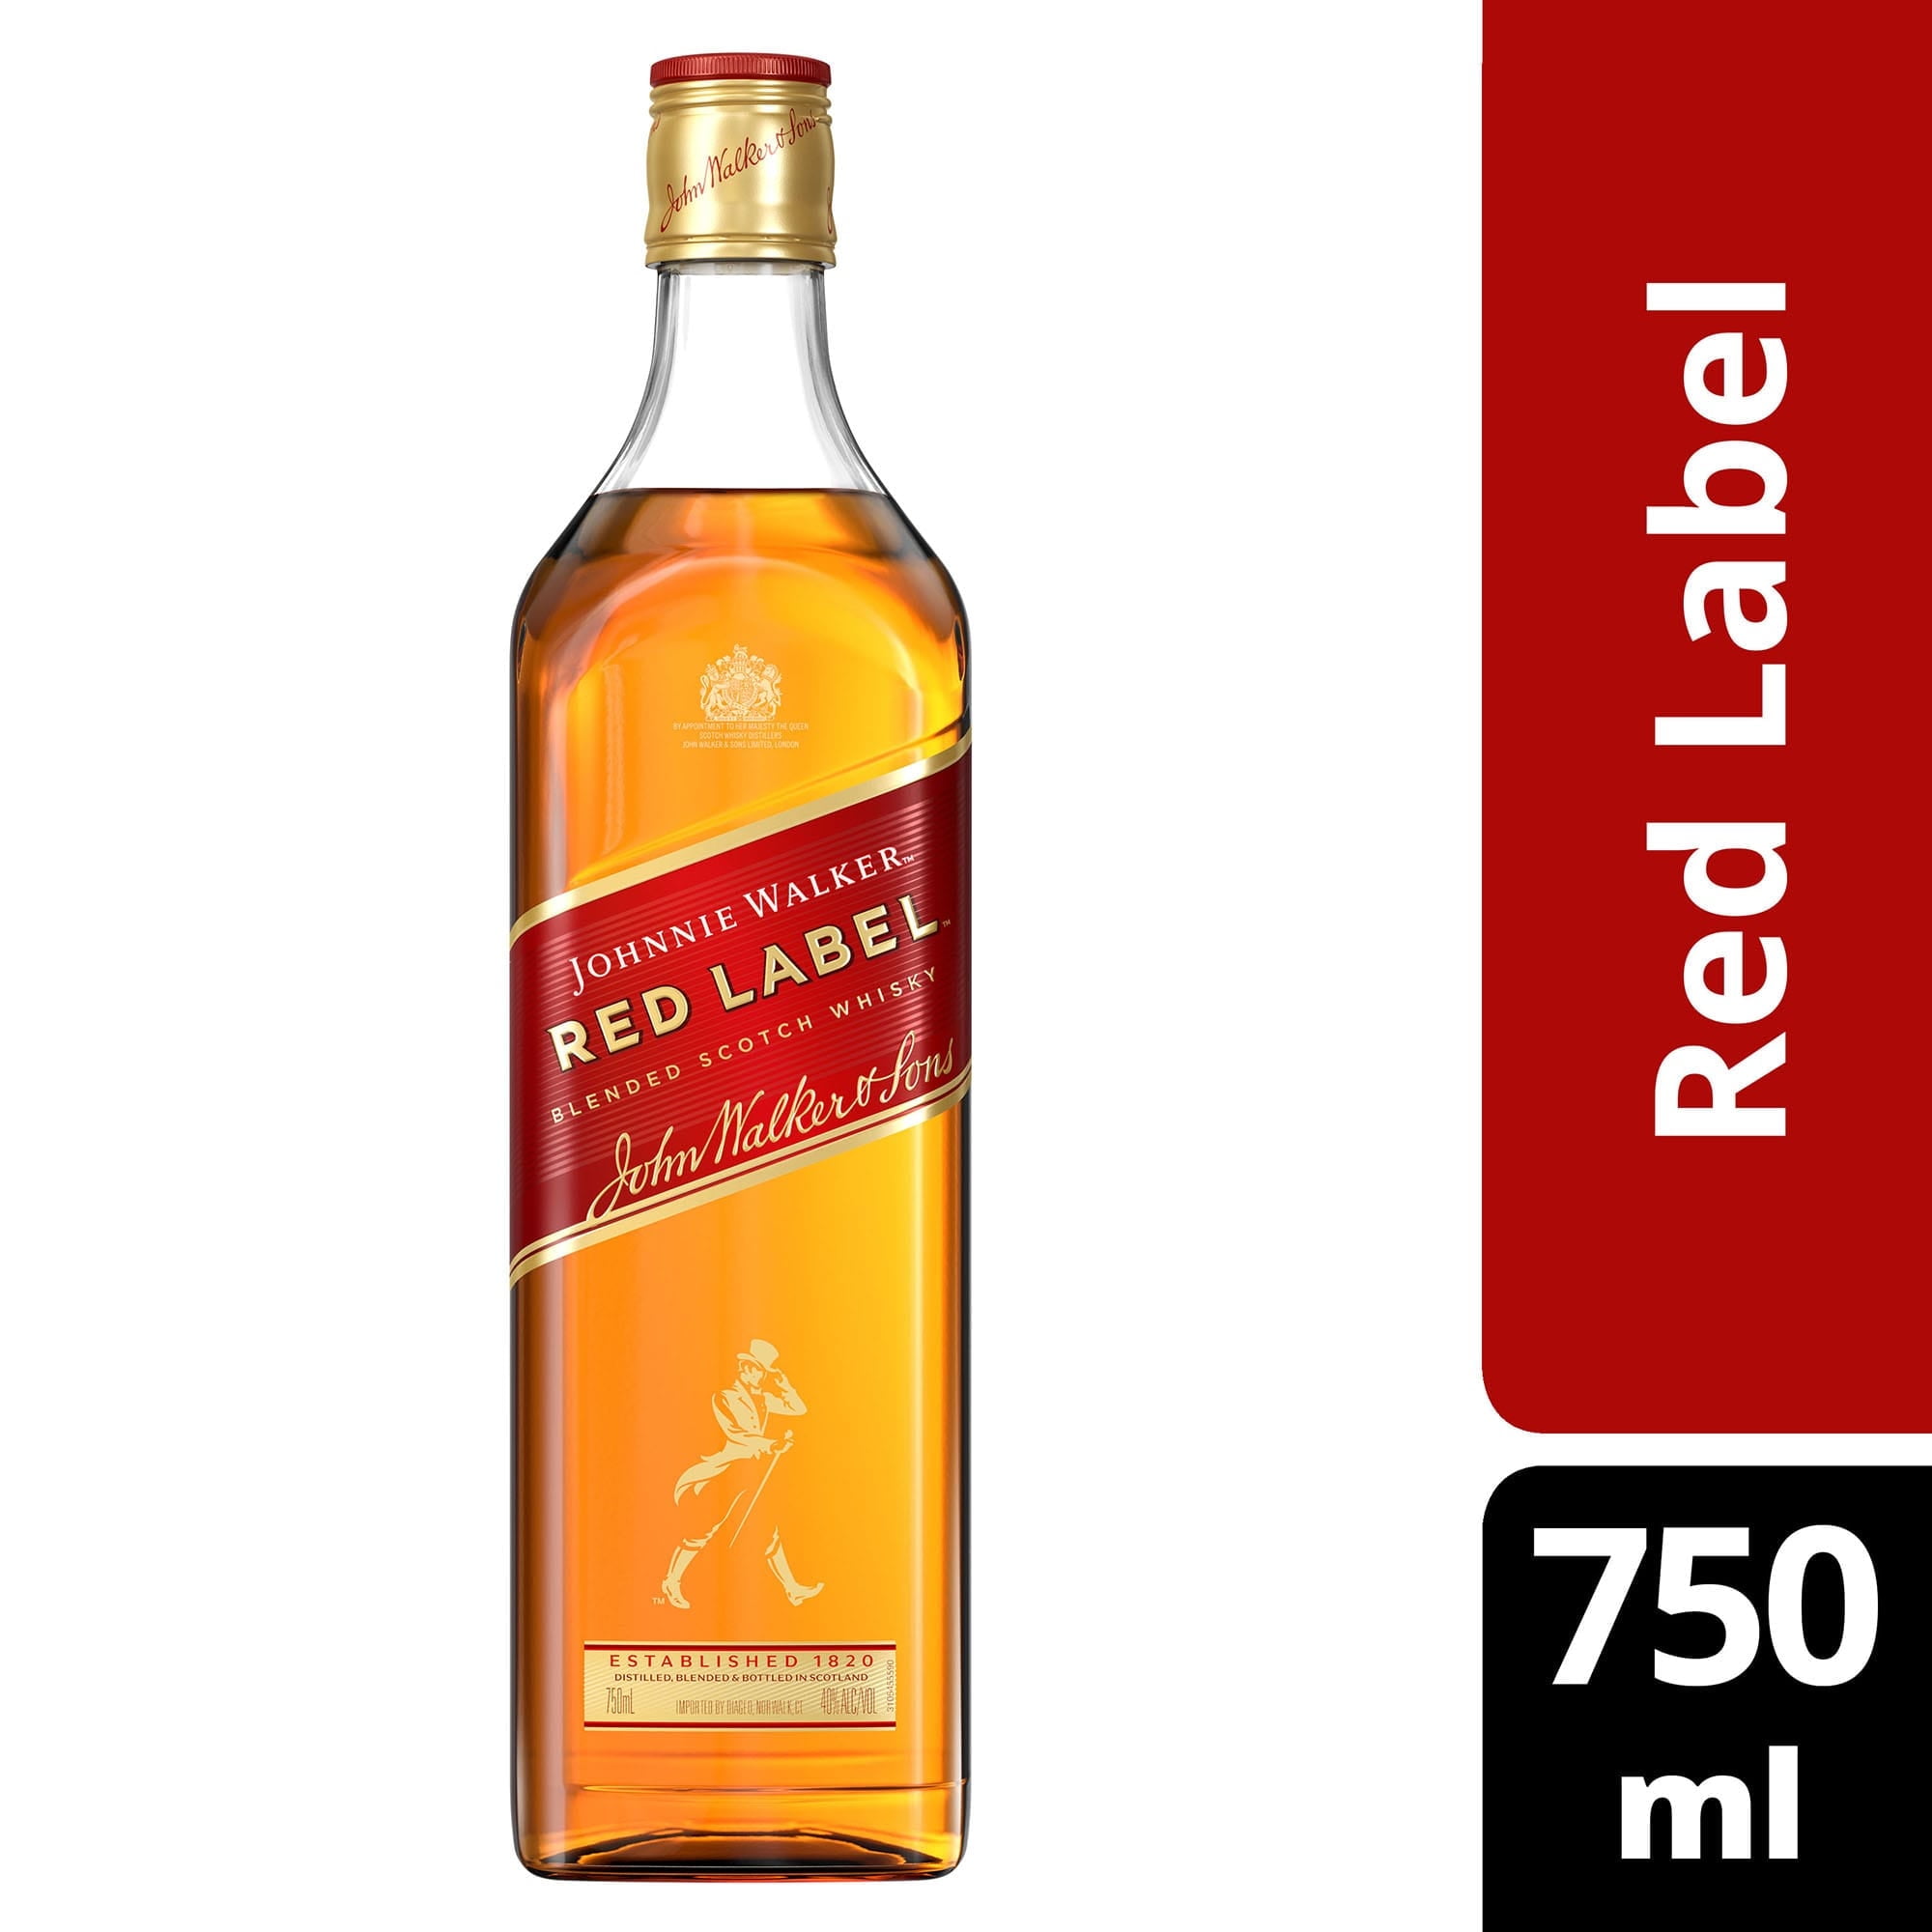 Johnnie Walker Red Label whisky tipo blended - 5Sentidos